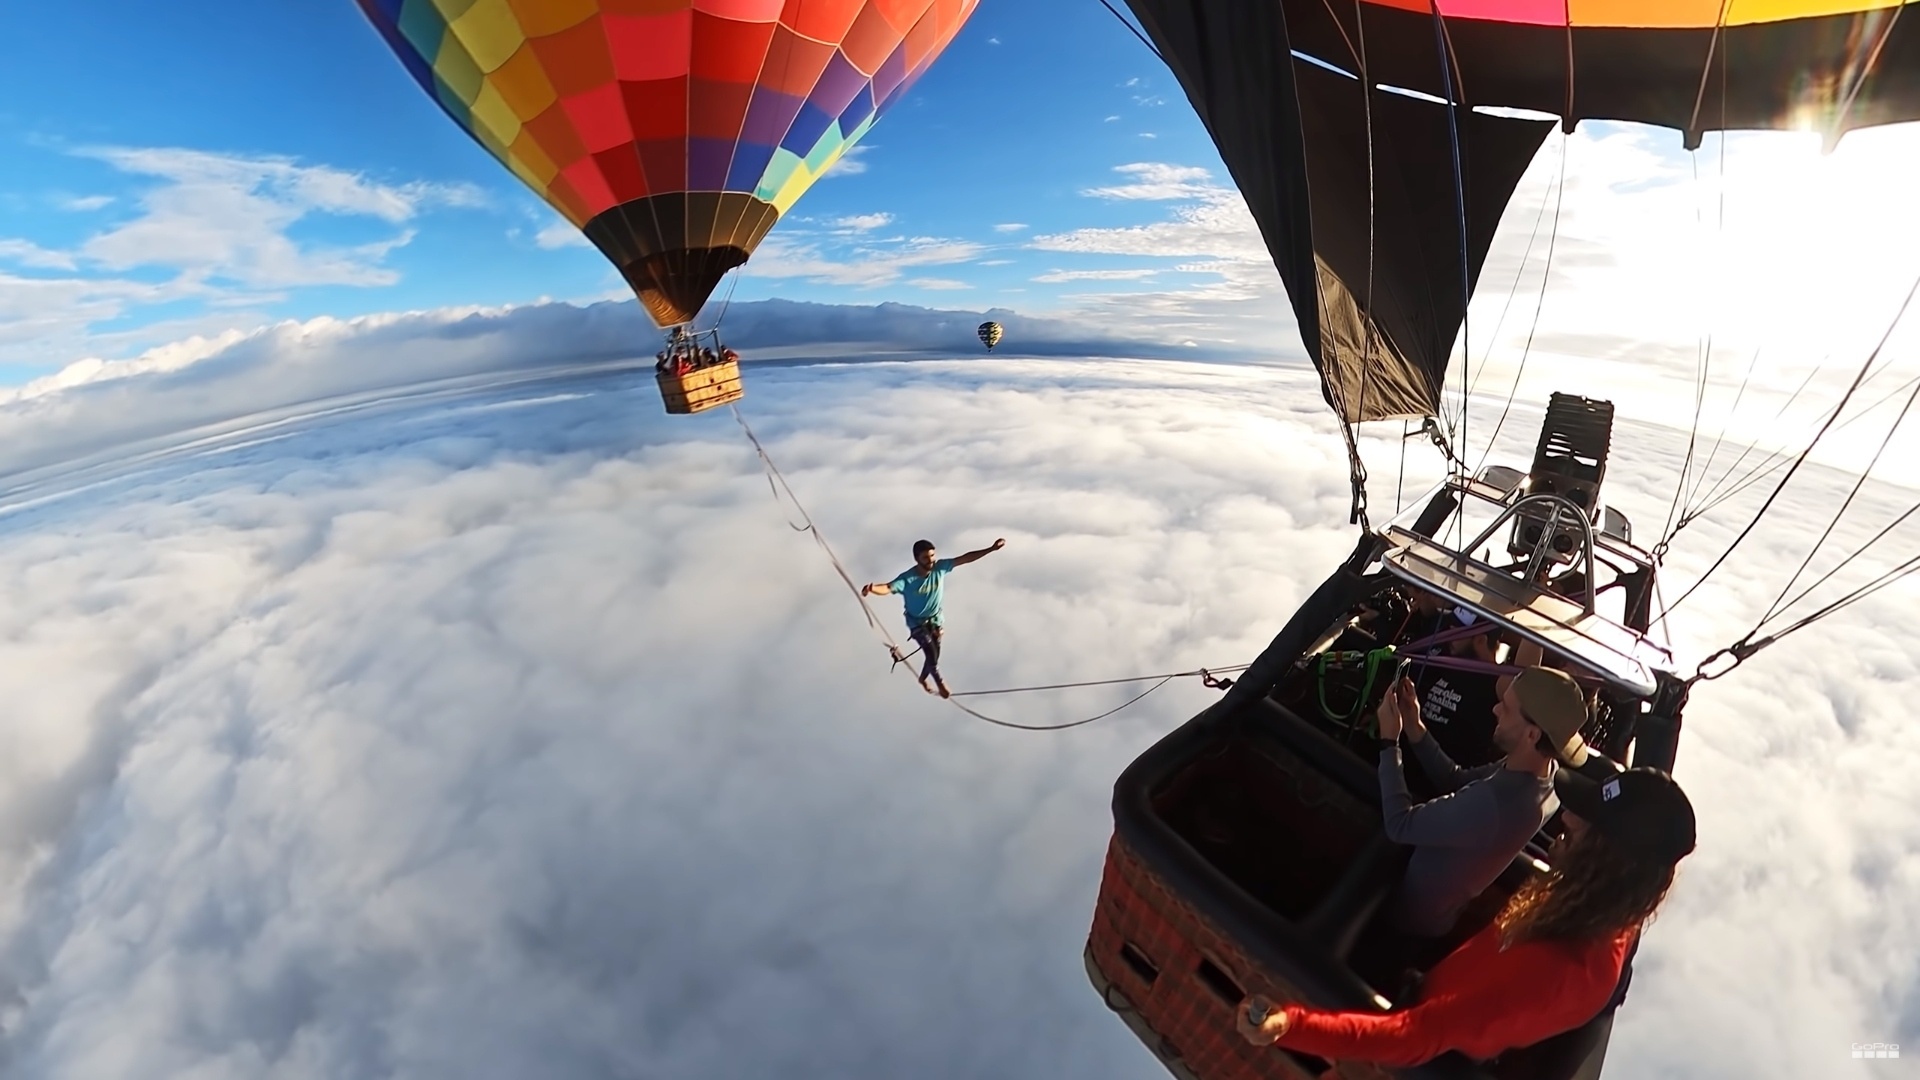 Air Sports: Extreme slacklining above the clouds between two hot-air balloons, Pro slackliner. 1920x1080 Full HD Wallpaper.